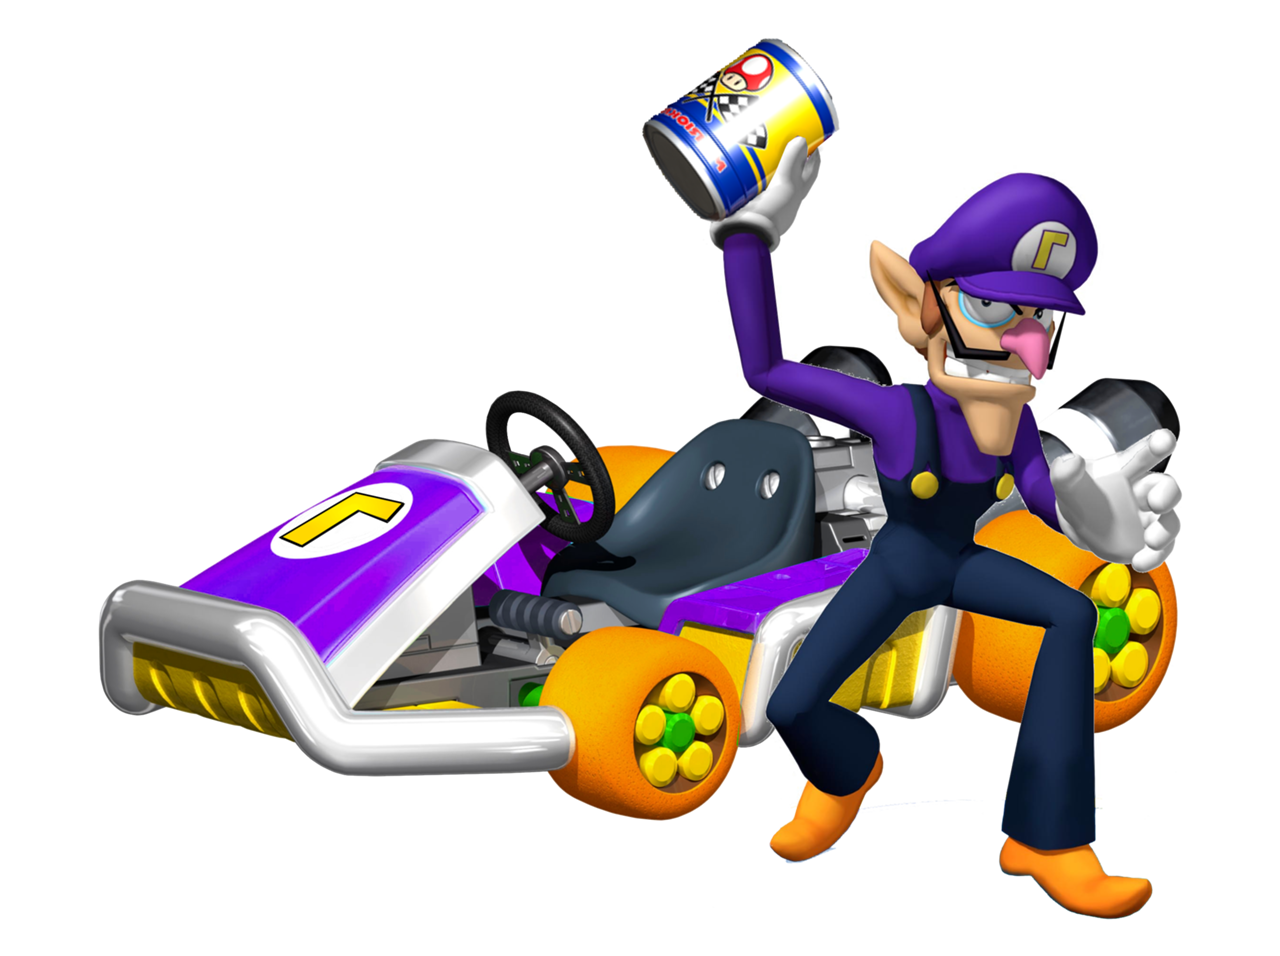 Waluigi from Mario kart 8 - #118012134 added by andydoopz at smartass